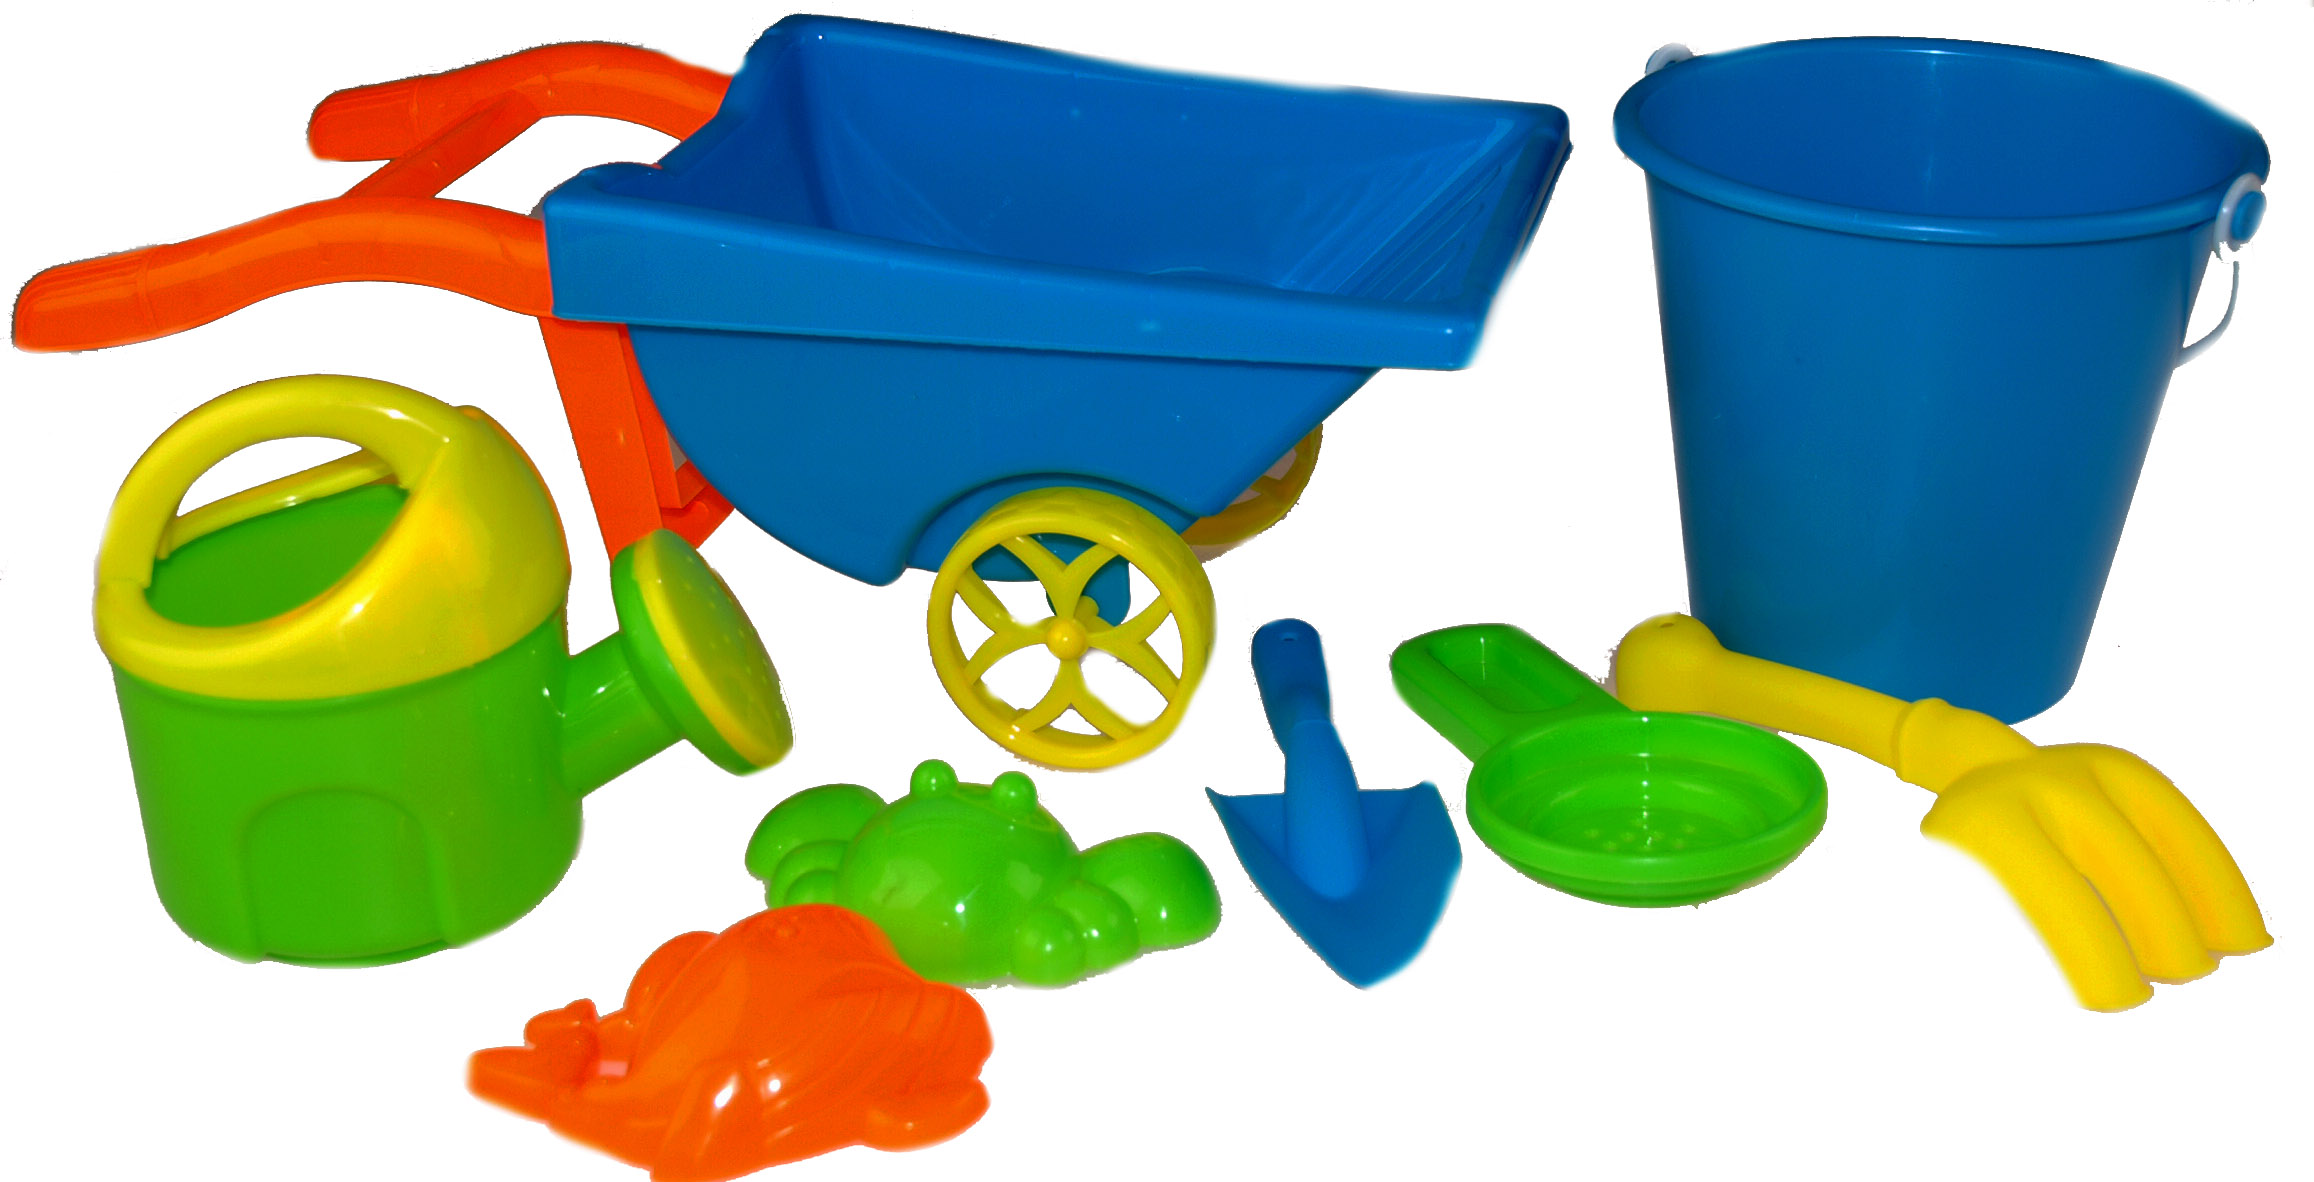 Sand and Water Table Garden Sandpit Play Set Toy Watering Can Spade Sand Bucket